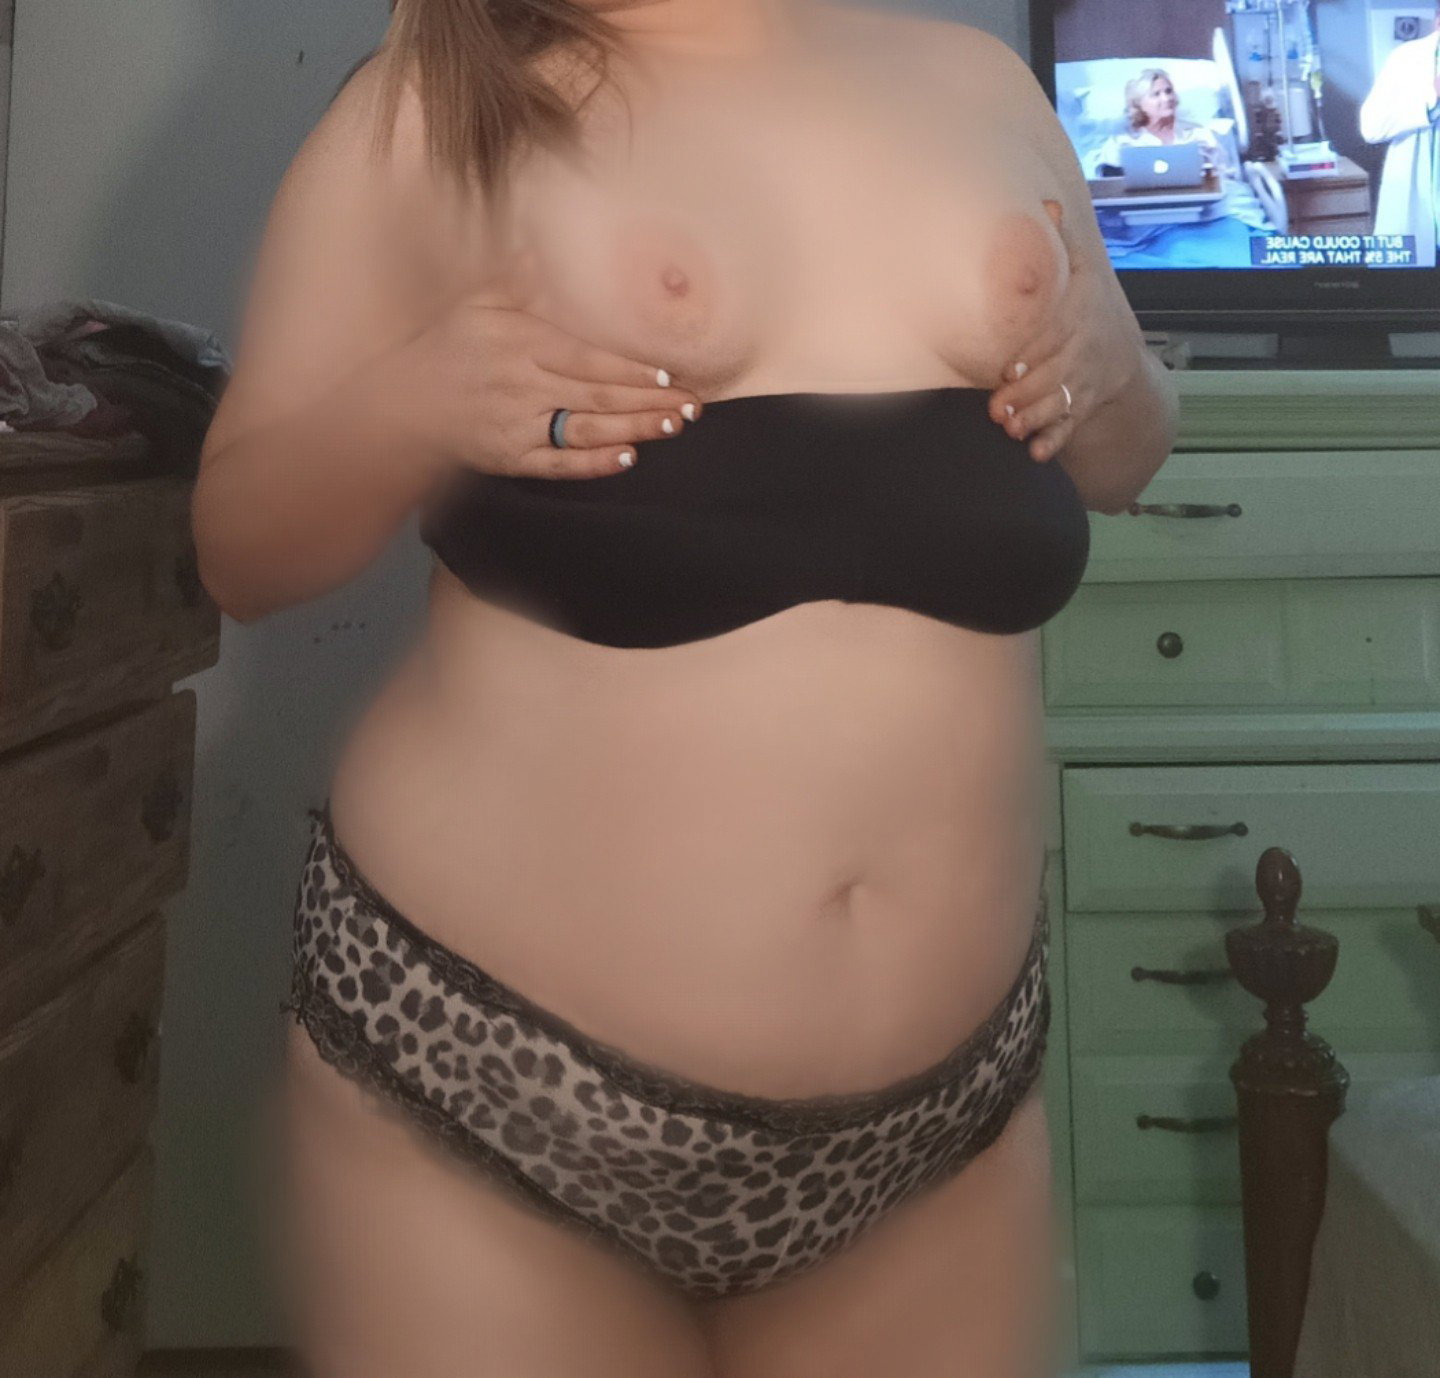 Photo by Peachy with the username @Peachycakes, who is a verified user,  May 10, 2024 at 10:50 PM. The post is about the topic MILF and the text says '#tits#MILF'